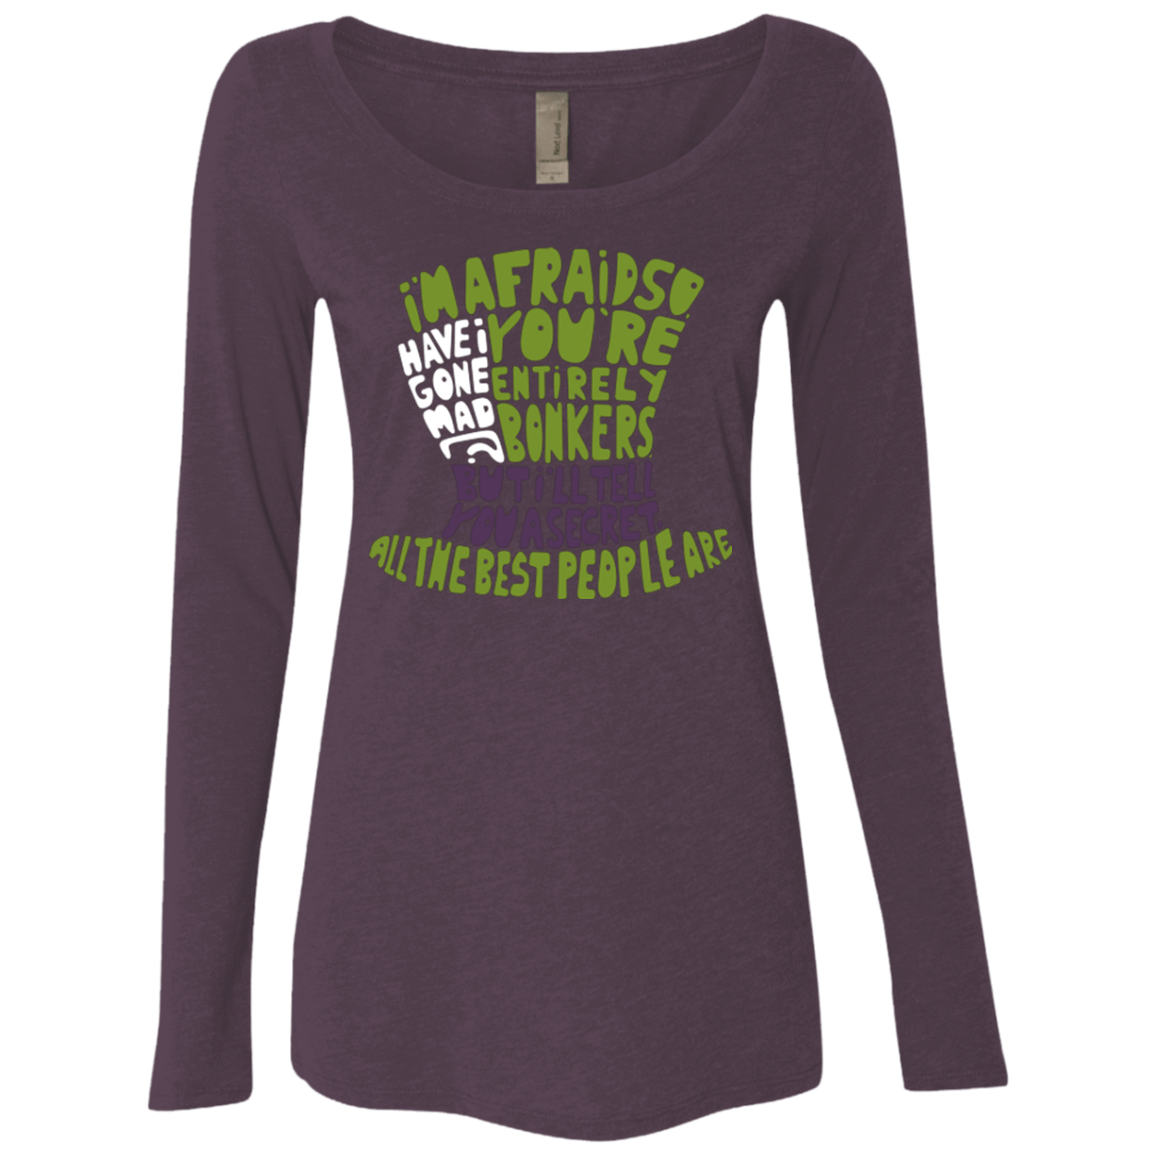 T-Shirts Vintage Purple / Small MAD HATTER2 Women's Triblend Long Sleeve Shirt